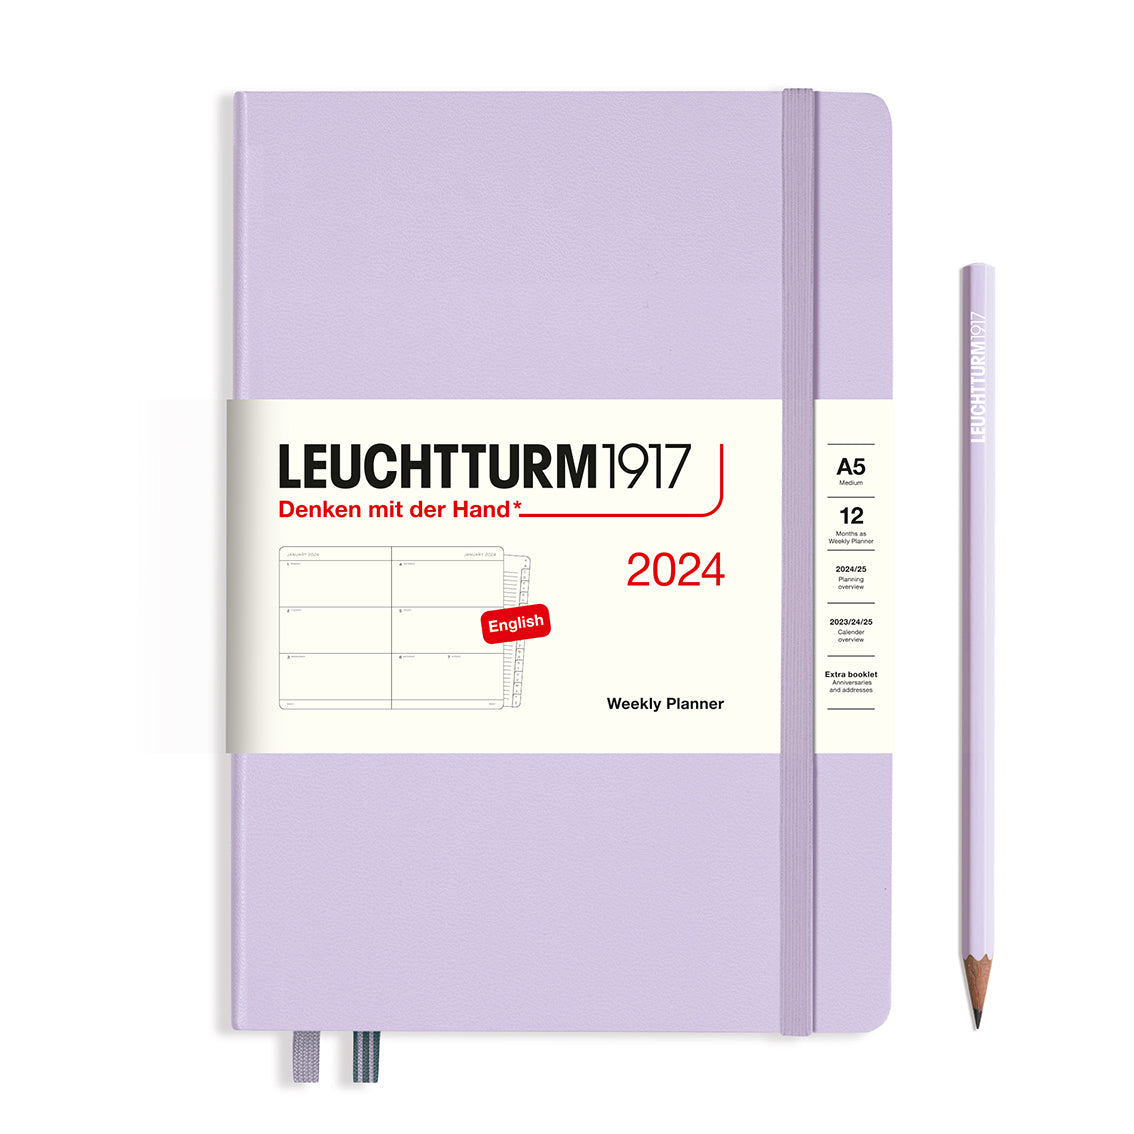 An image of a lilac planner with a lilac elastic band holding it together and a cream paper wrap around the middle stating the business name Leuchtturm1917, that it is for the year 2024, it is a weekly planner, is A5 in size and an English language version. It has an image on the wrap showing the inside layout which is a week spread across 2 pages. A lilac pencil is shown at the side of the planner.